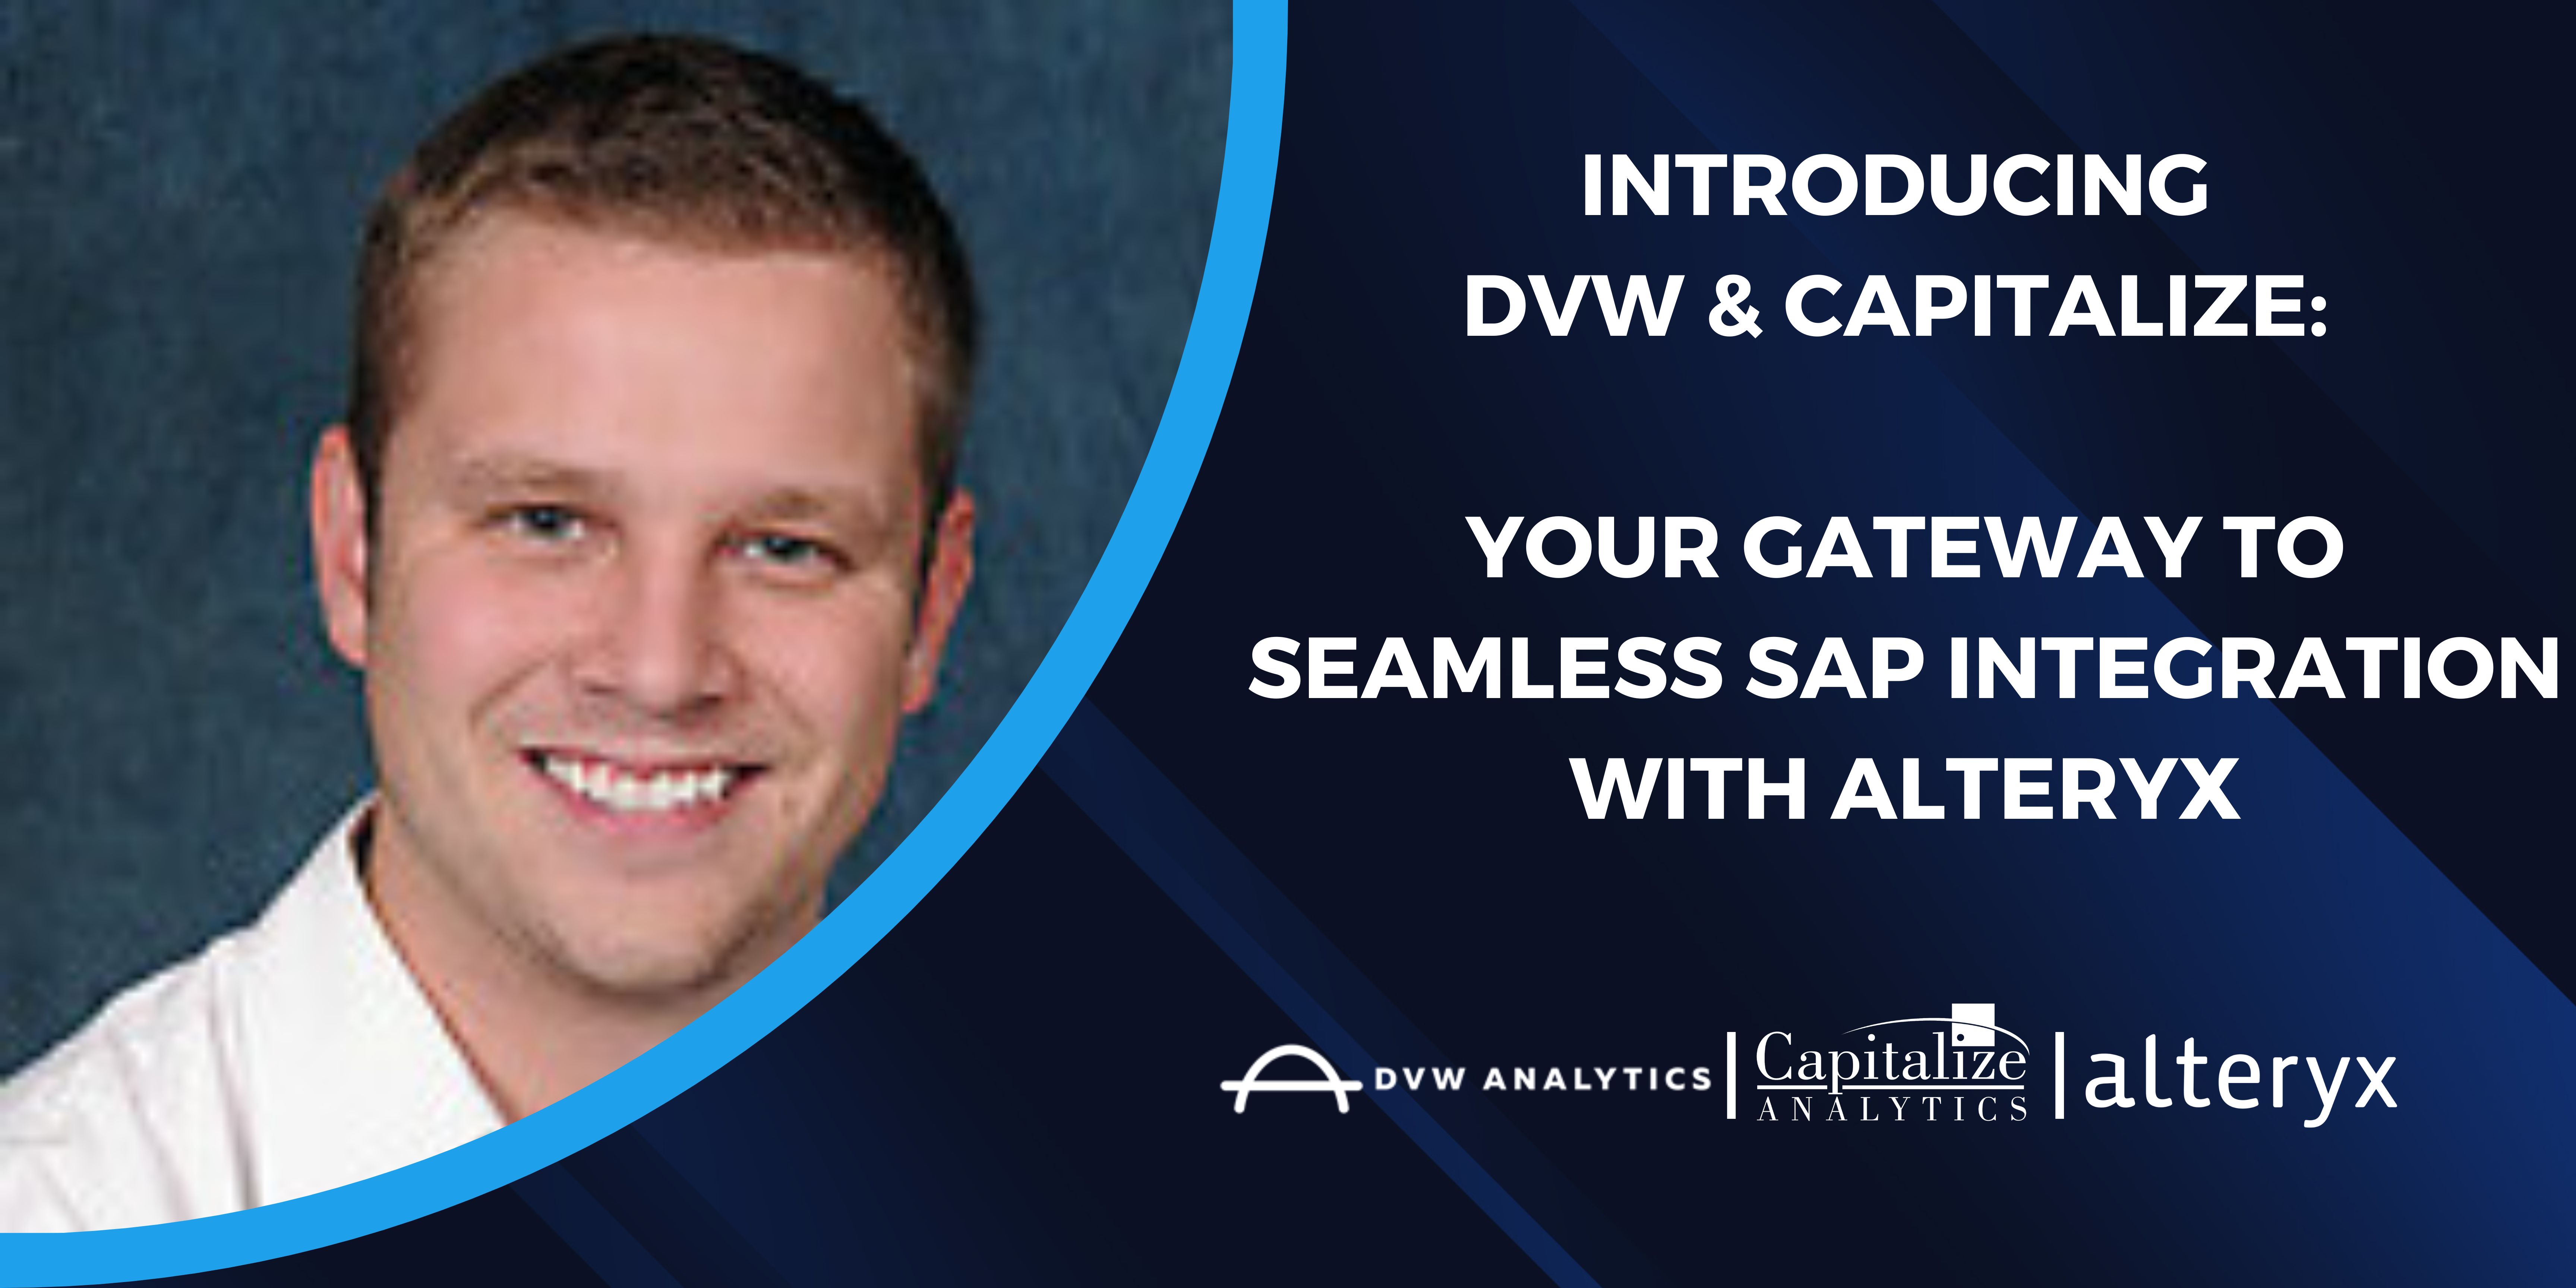 Introducing DVW & Capitalize: Your Gateway to Seamless SAP Integration with Alteryx